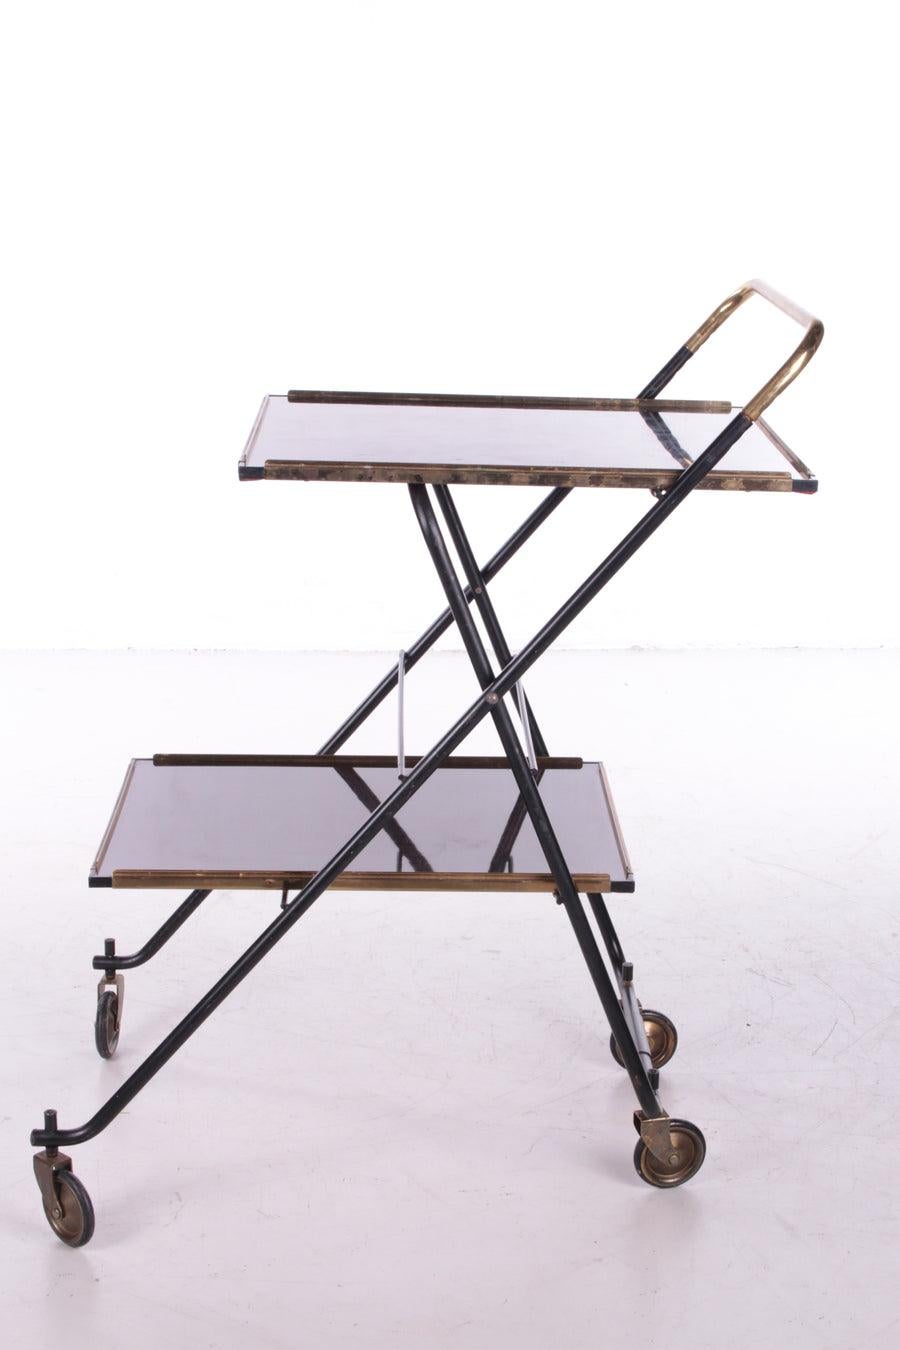 Vintage French Serving Trolley or Drinks Trolley, 1960s

Serve food and drinks in style with this chic French 1950s trolley.

The typical sleek frame is made of gold-colored brass with black metal, the top is made of shiny wood that gives the whole